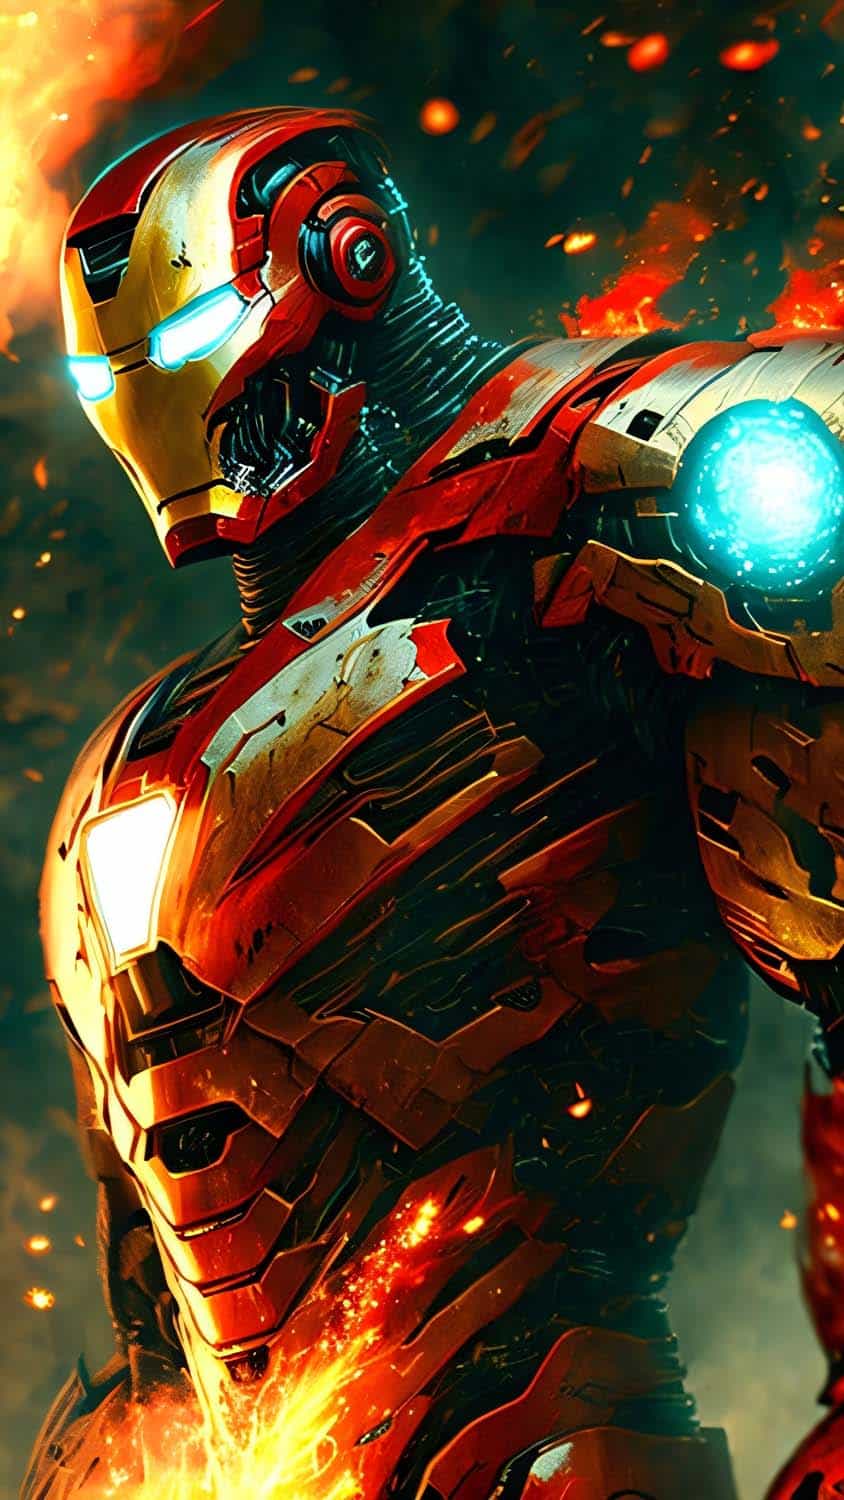 The Iron Man Armor IPhone Wallpaper HD - IPhone Wallpapers ...